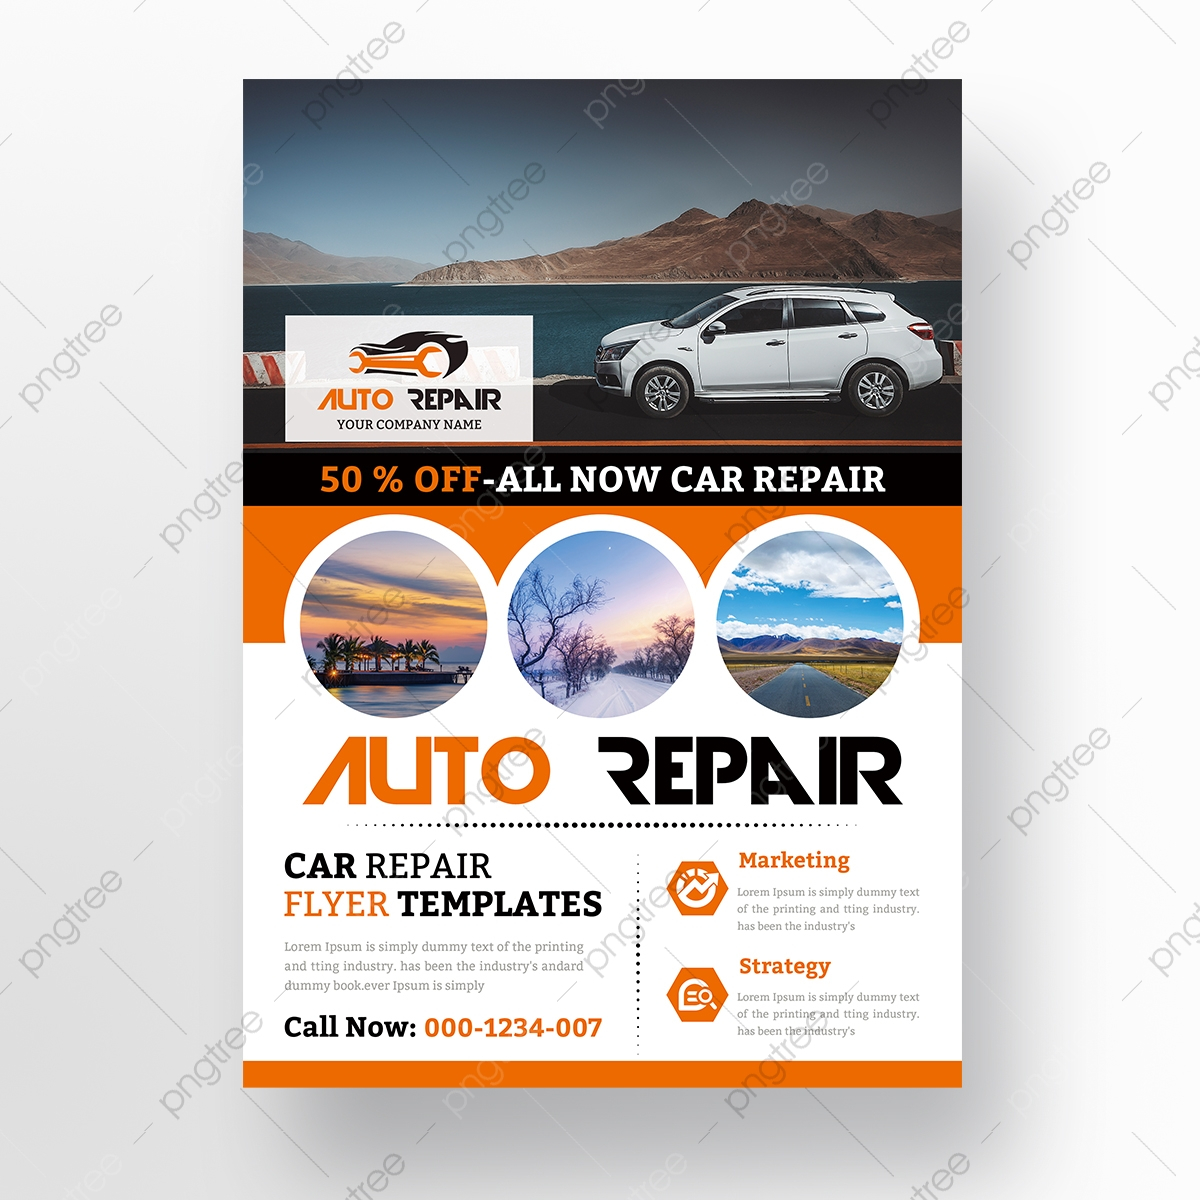 Auto Repair Flyer Template Download on Pngtree Pertaining To Auto Shop Flyer Template Inside Auto Shop Flyer Template